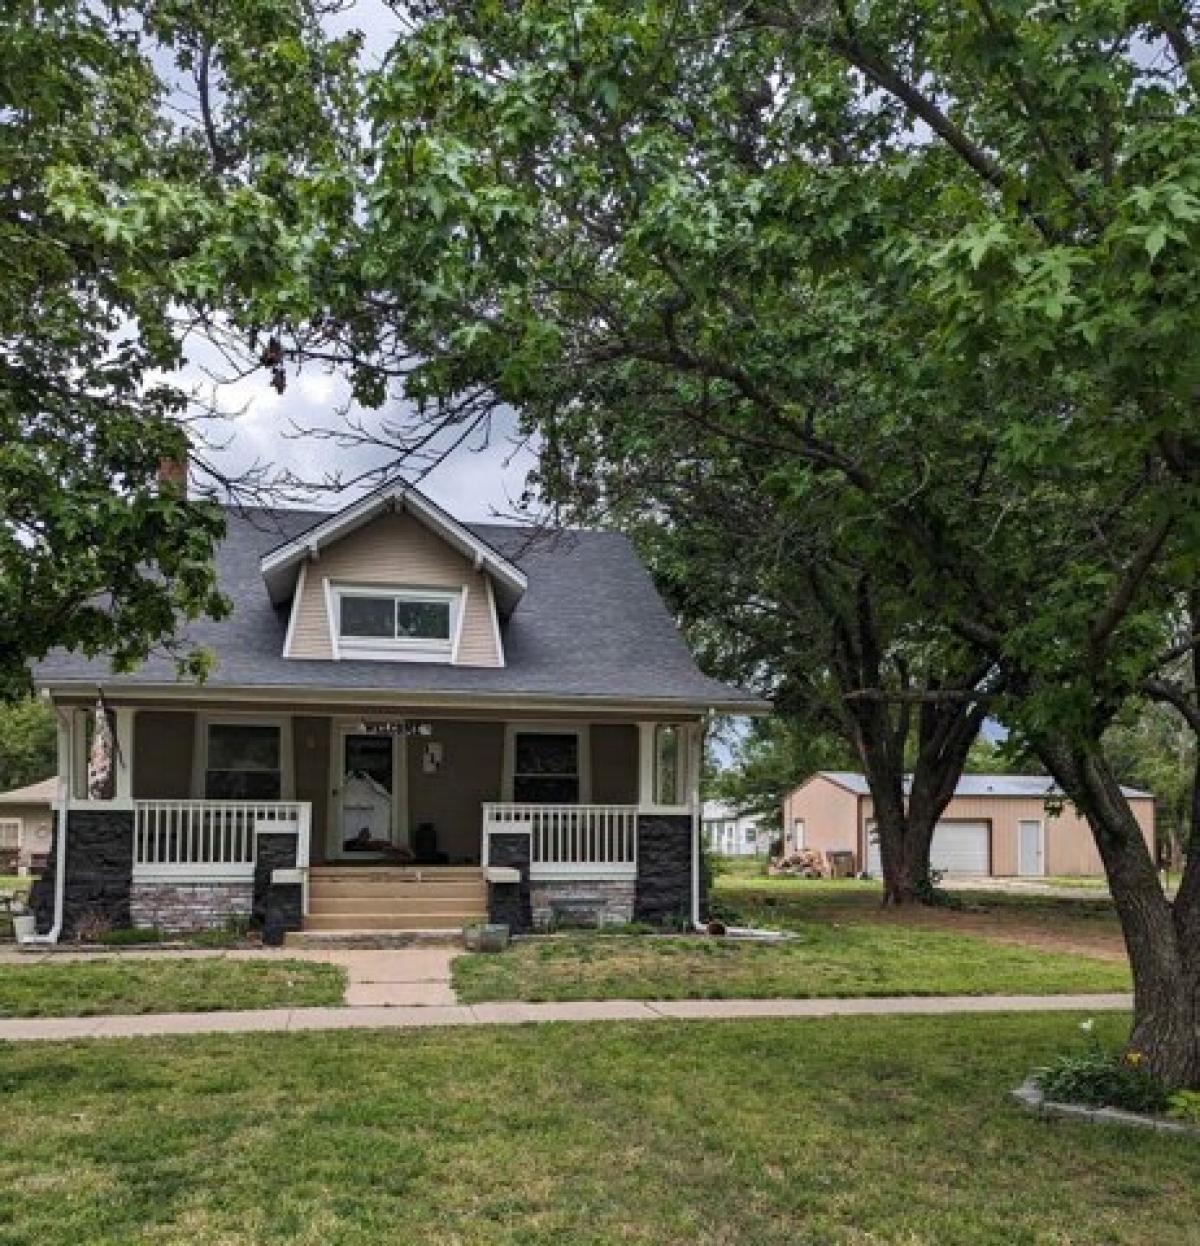 Picture of Home For Sale in Douglass, Kansas, United States